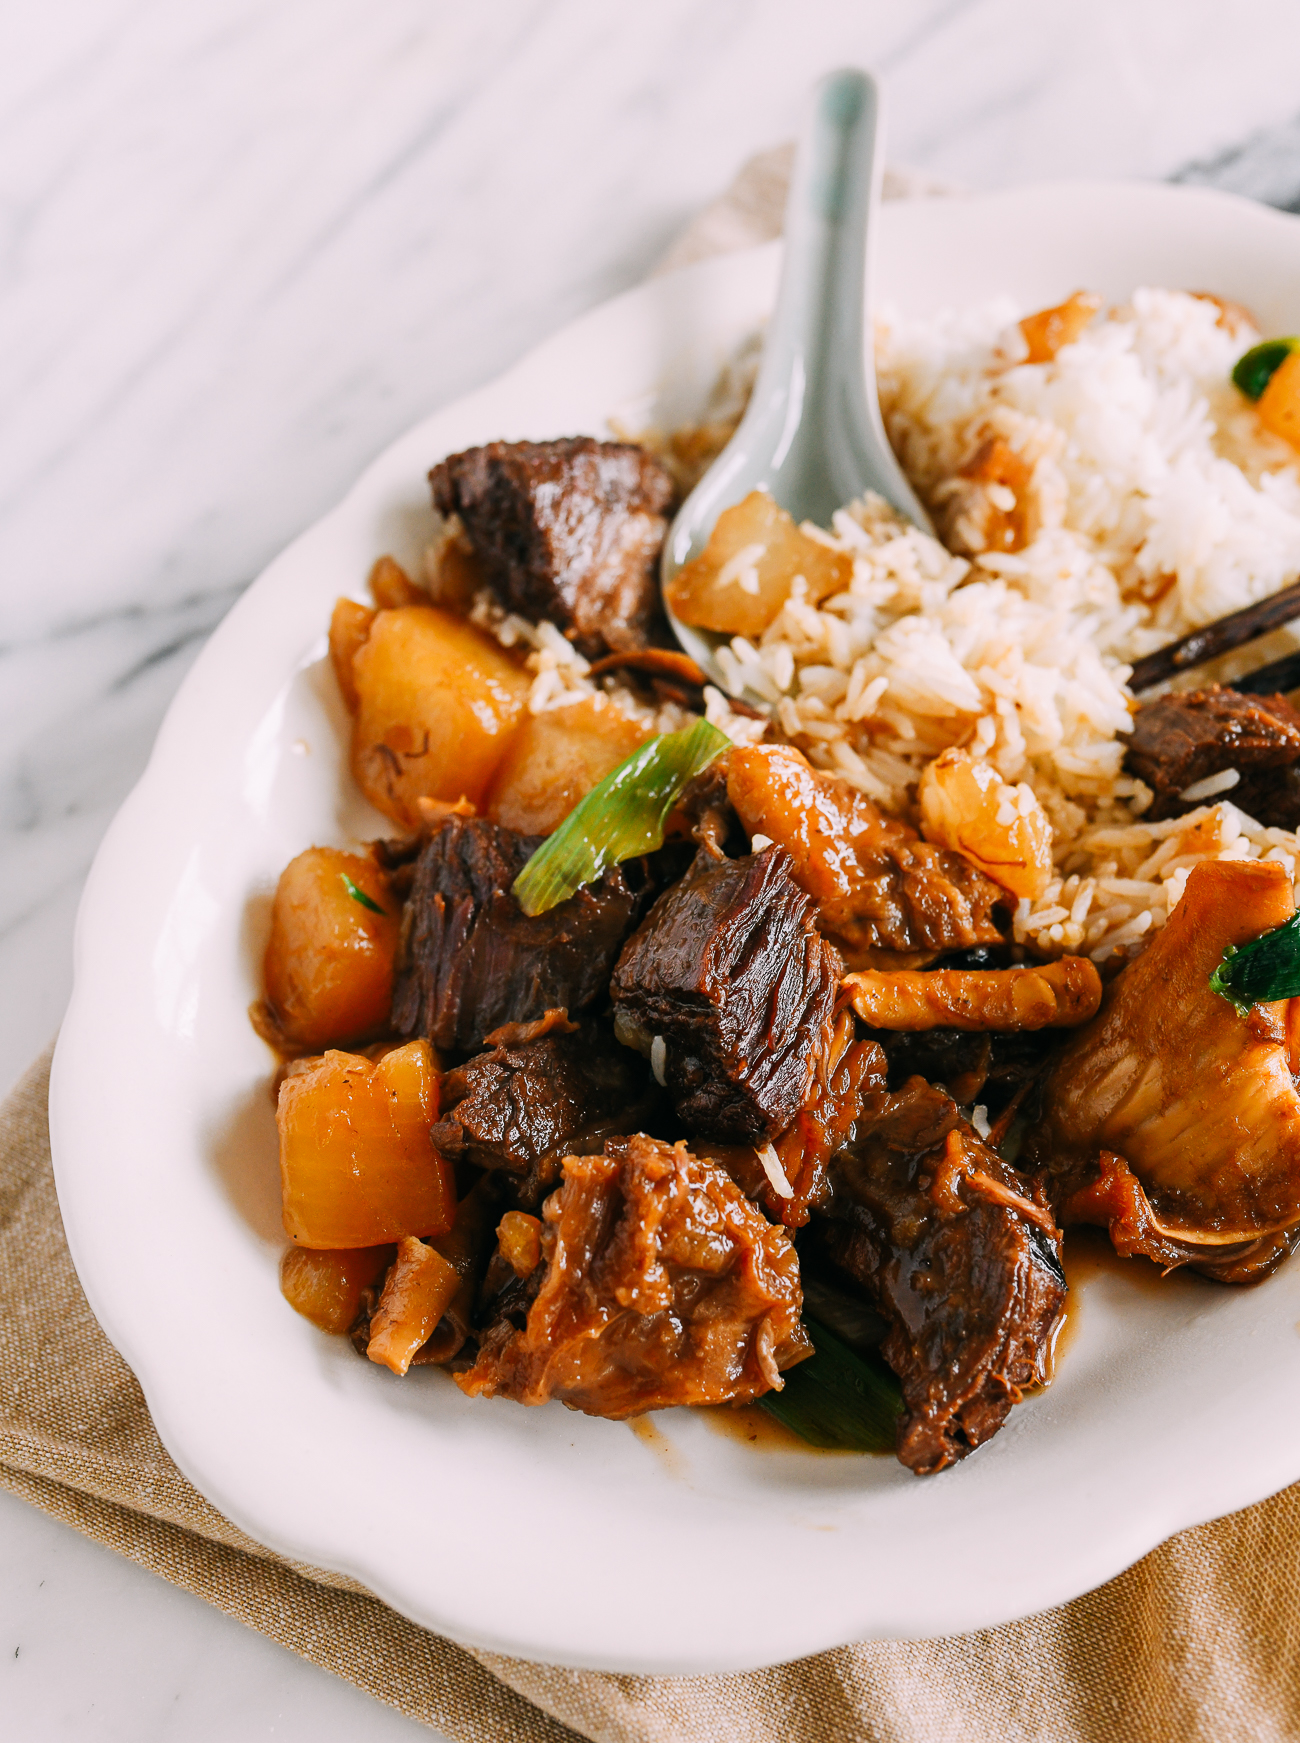 Cantonese Braised Beef with Daikon over Rice